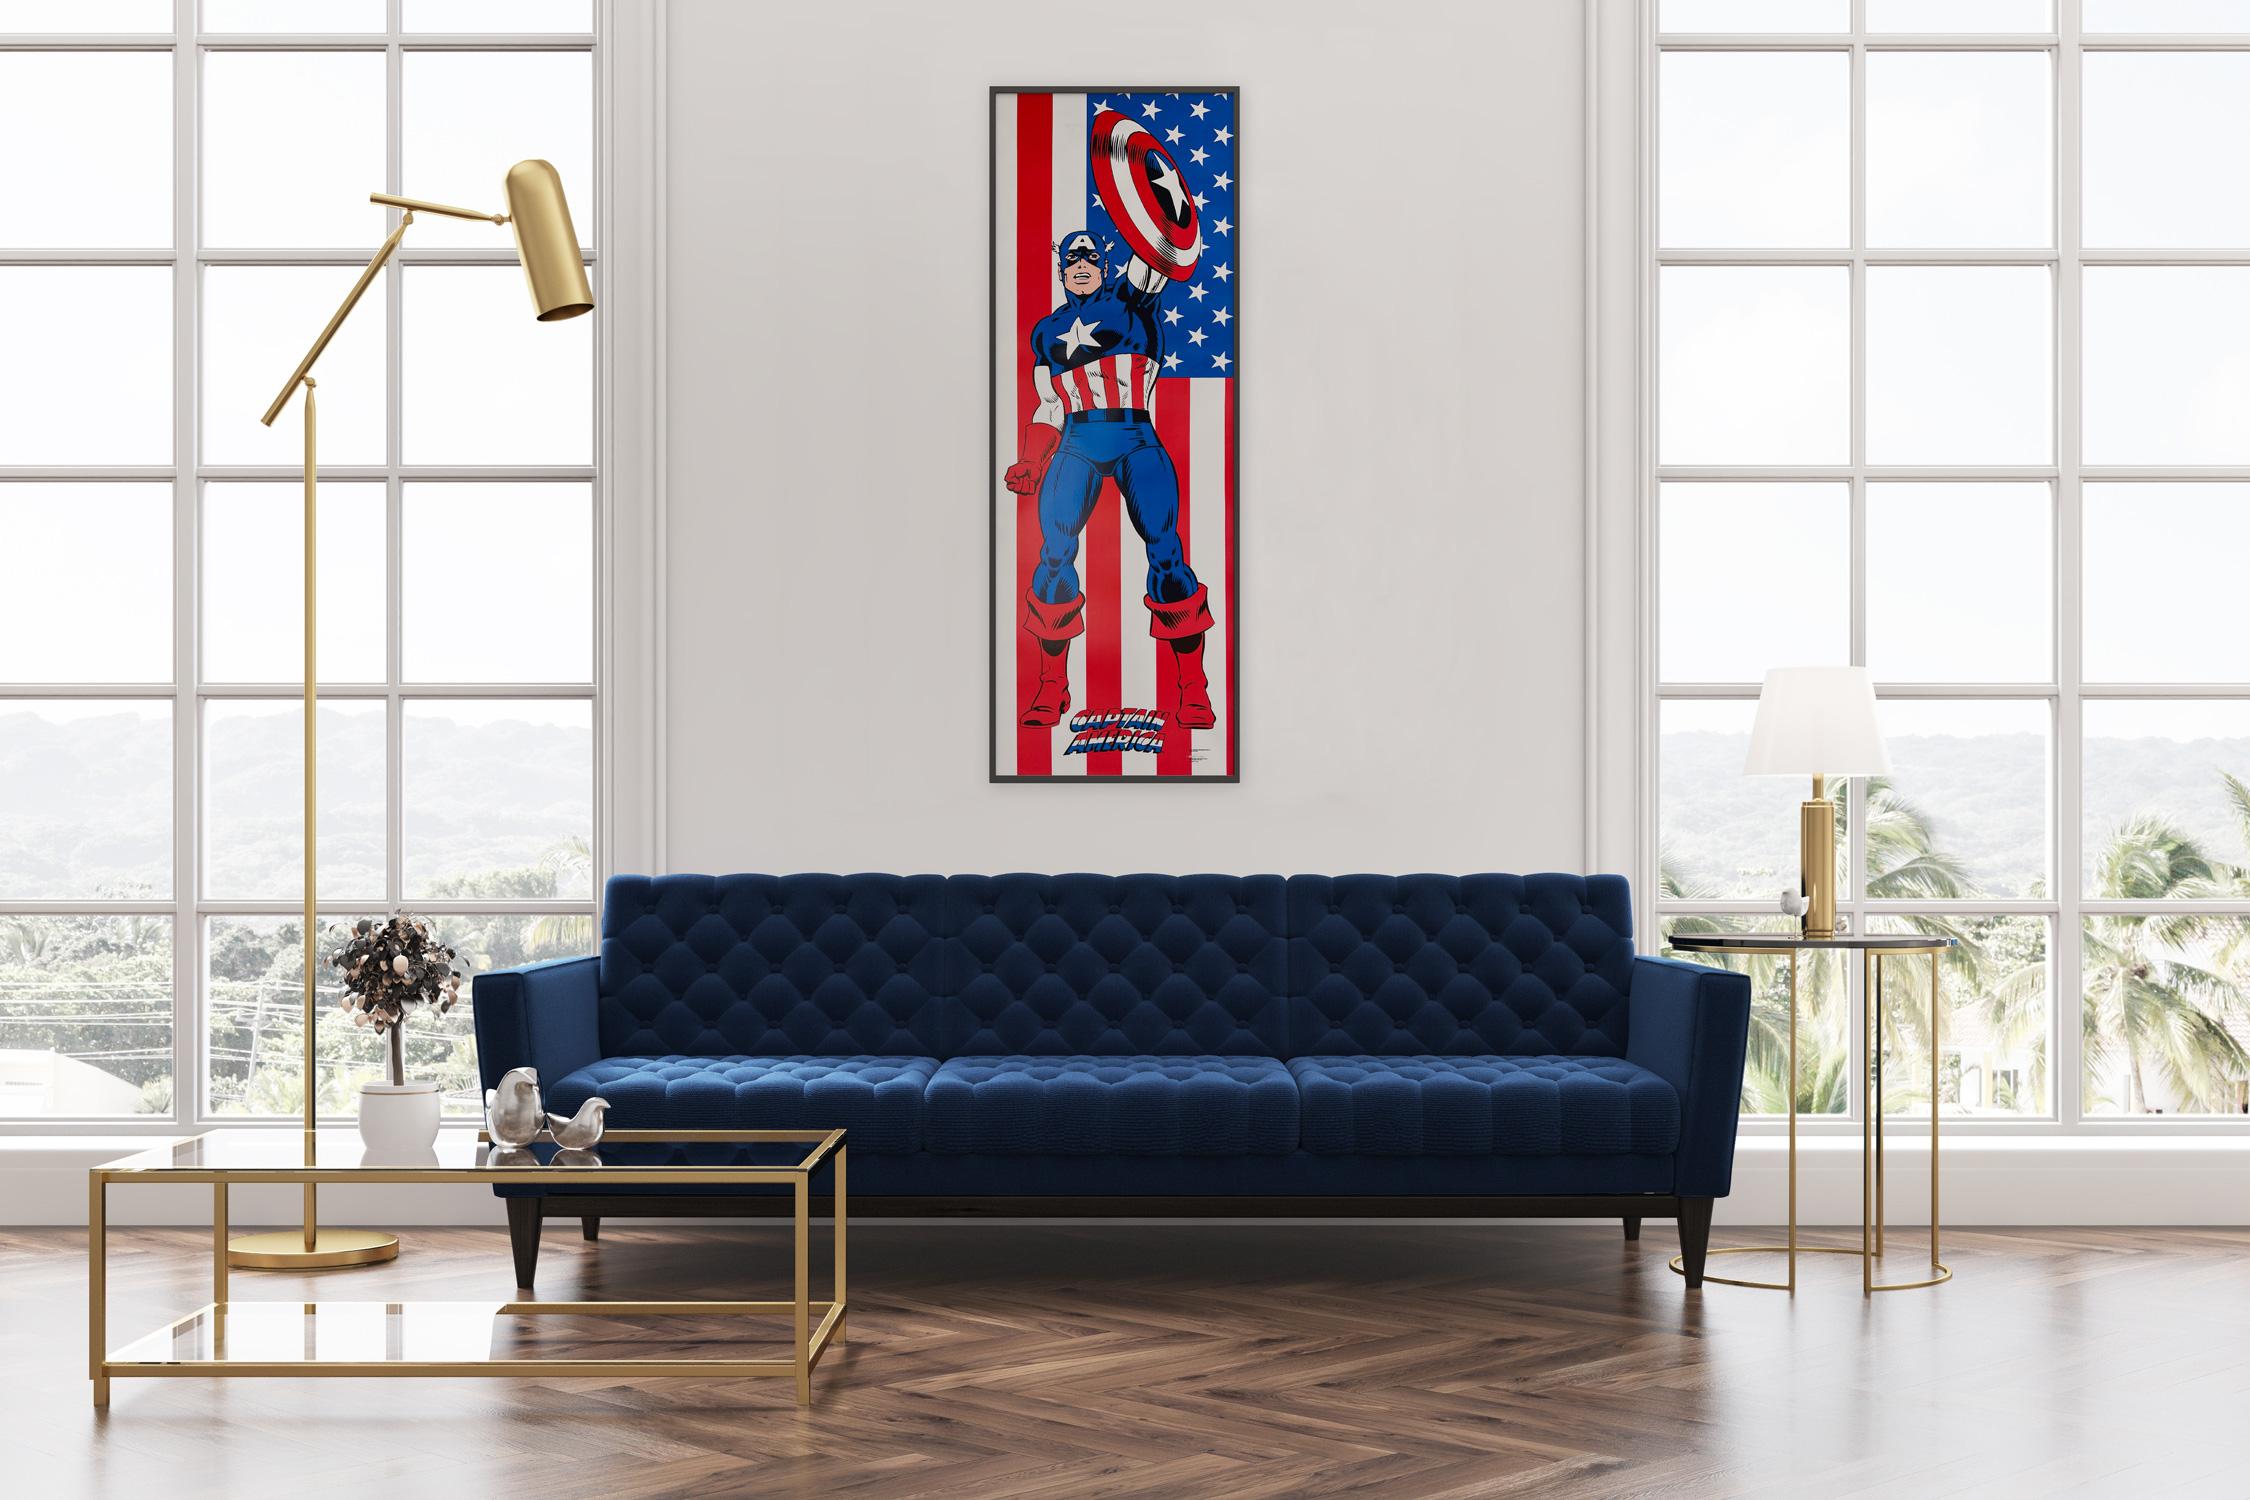 Wonderful vintage 1991 US poster from for Marvel's Captain America. This Supersized door panel is simply super!!!!

This vintage poster have been professionally cleaned, de-acidified and linen-backed and is sized 24 1/4 x 71 1/2 inches (27 x 75 1/2